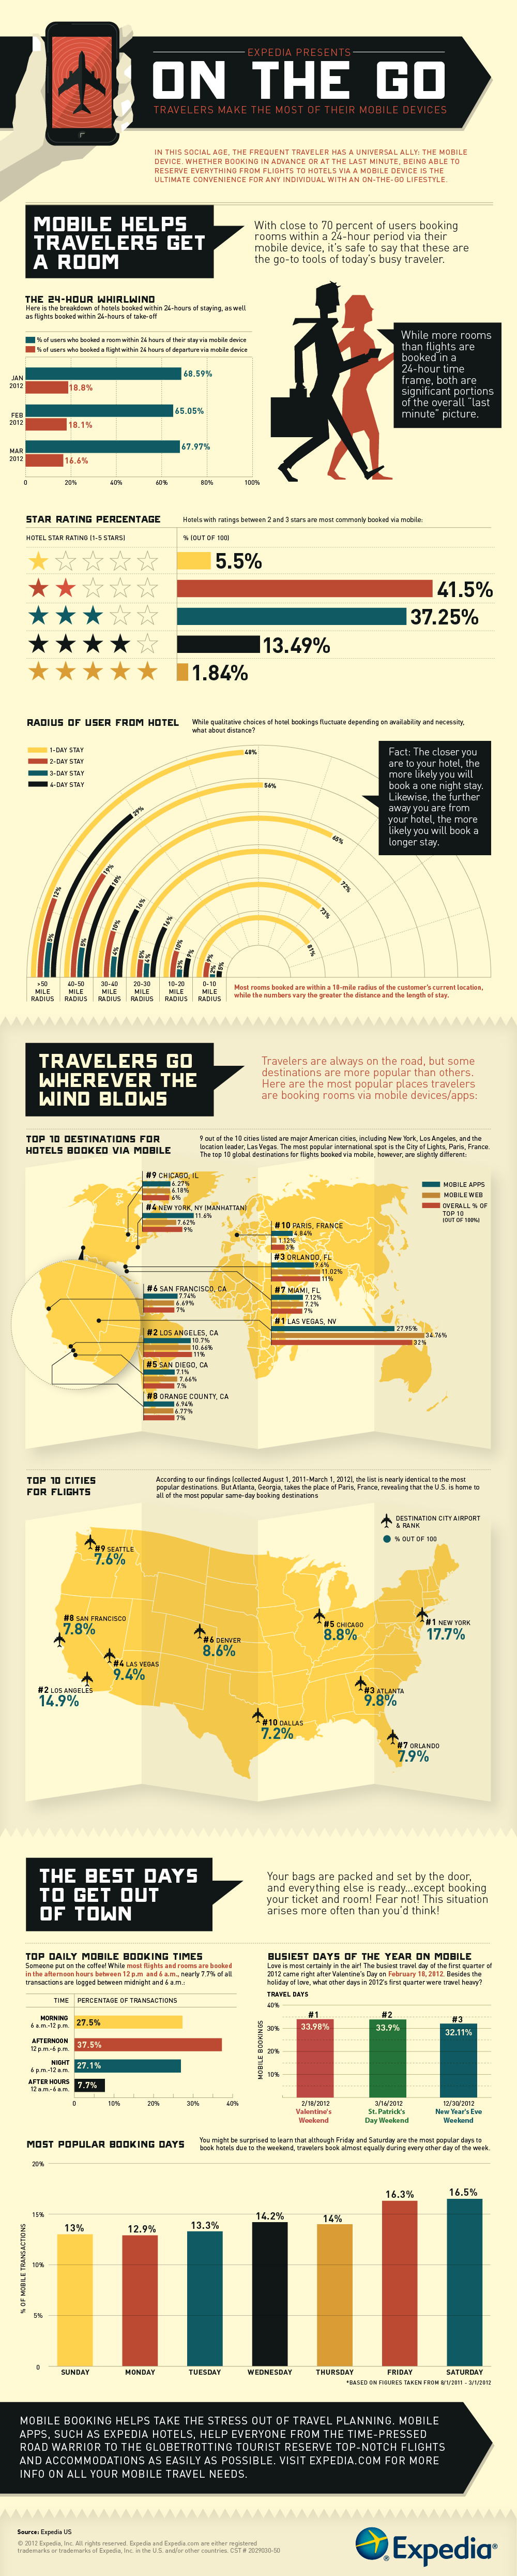 Travelers Making the Most of Their Mobile Devices